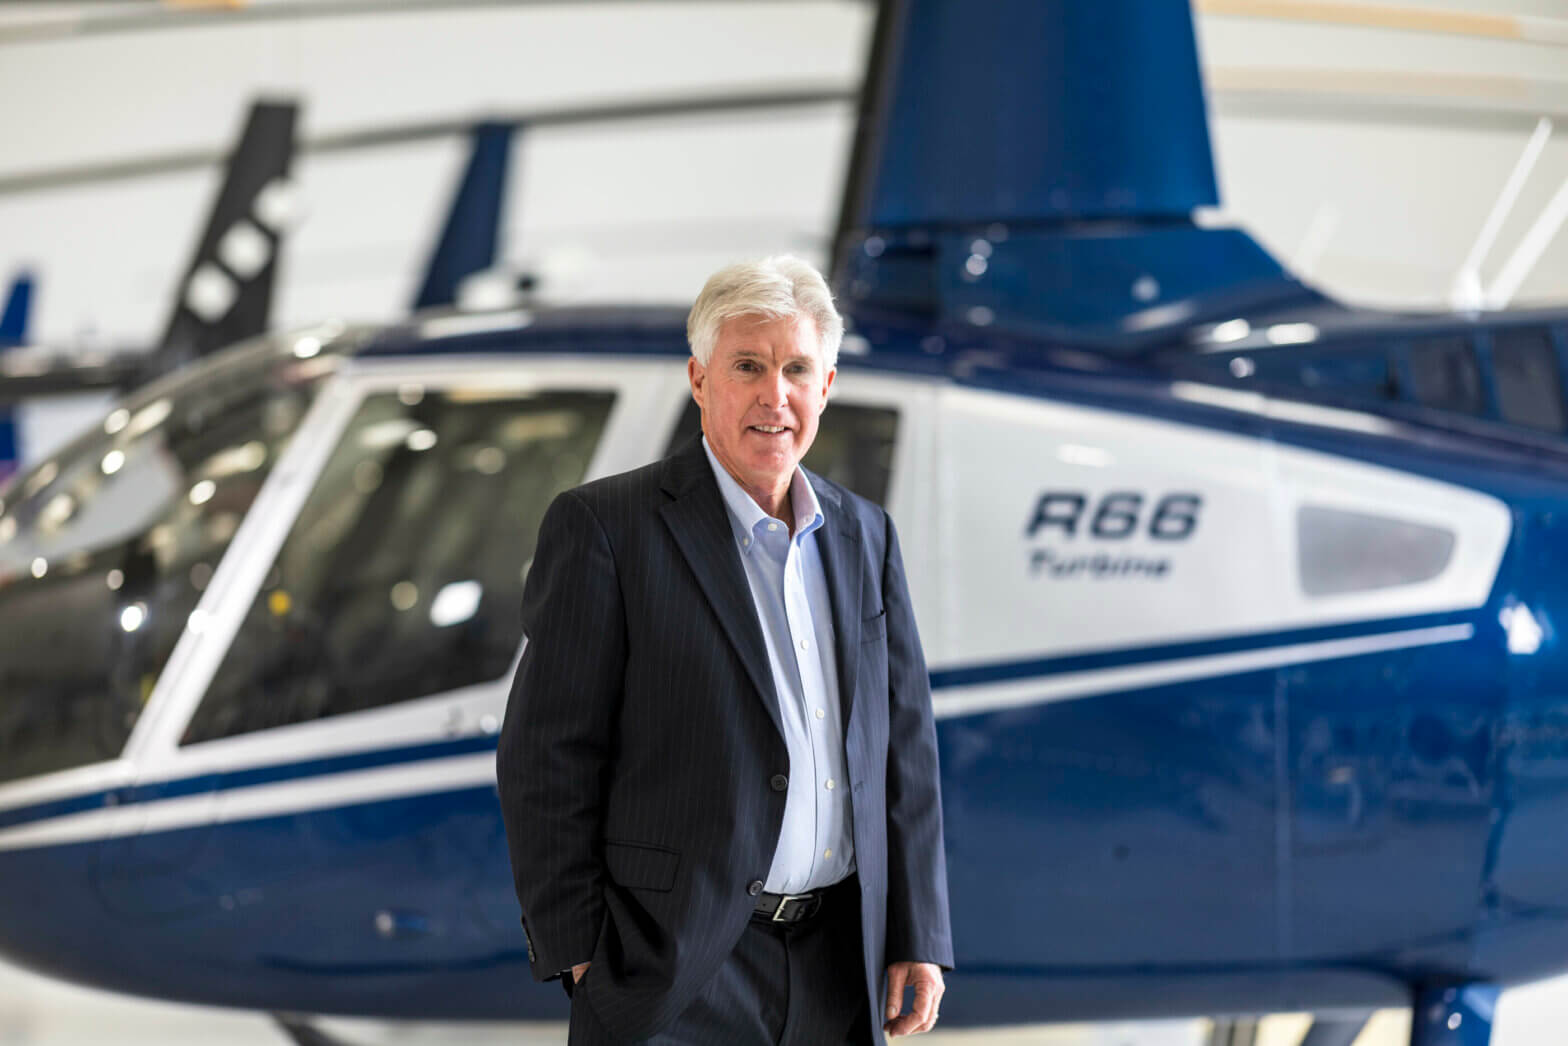 Robinson Helicopter Company marks the end of an era